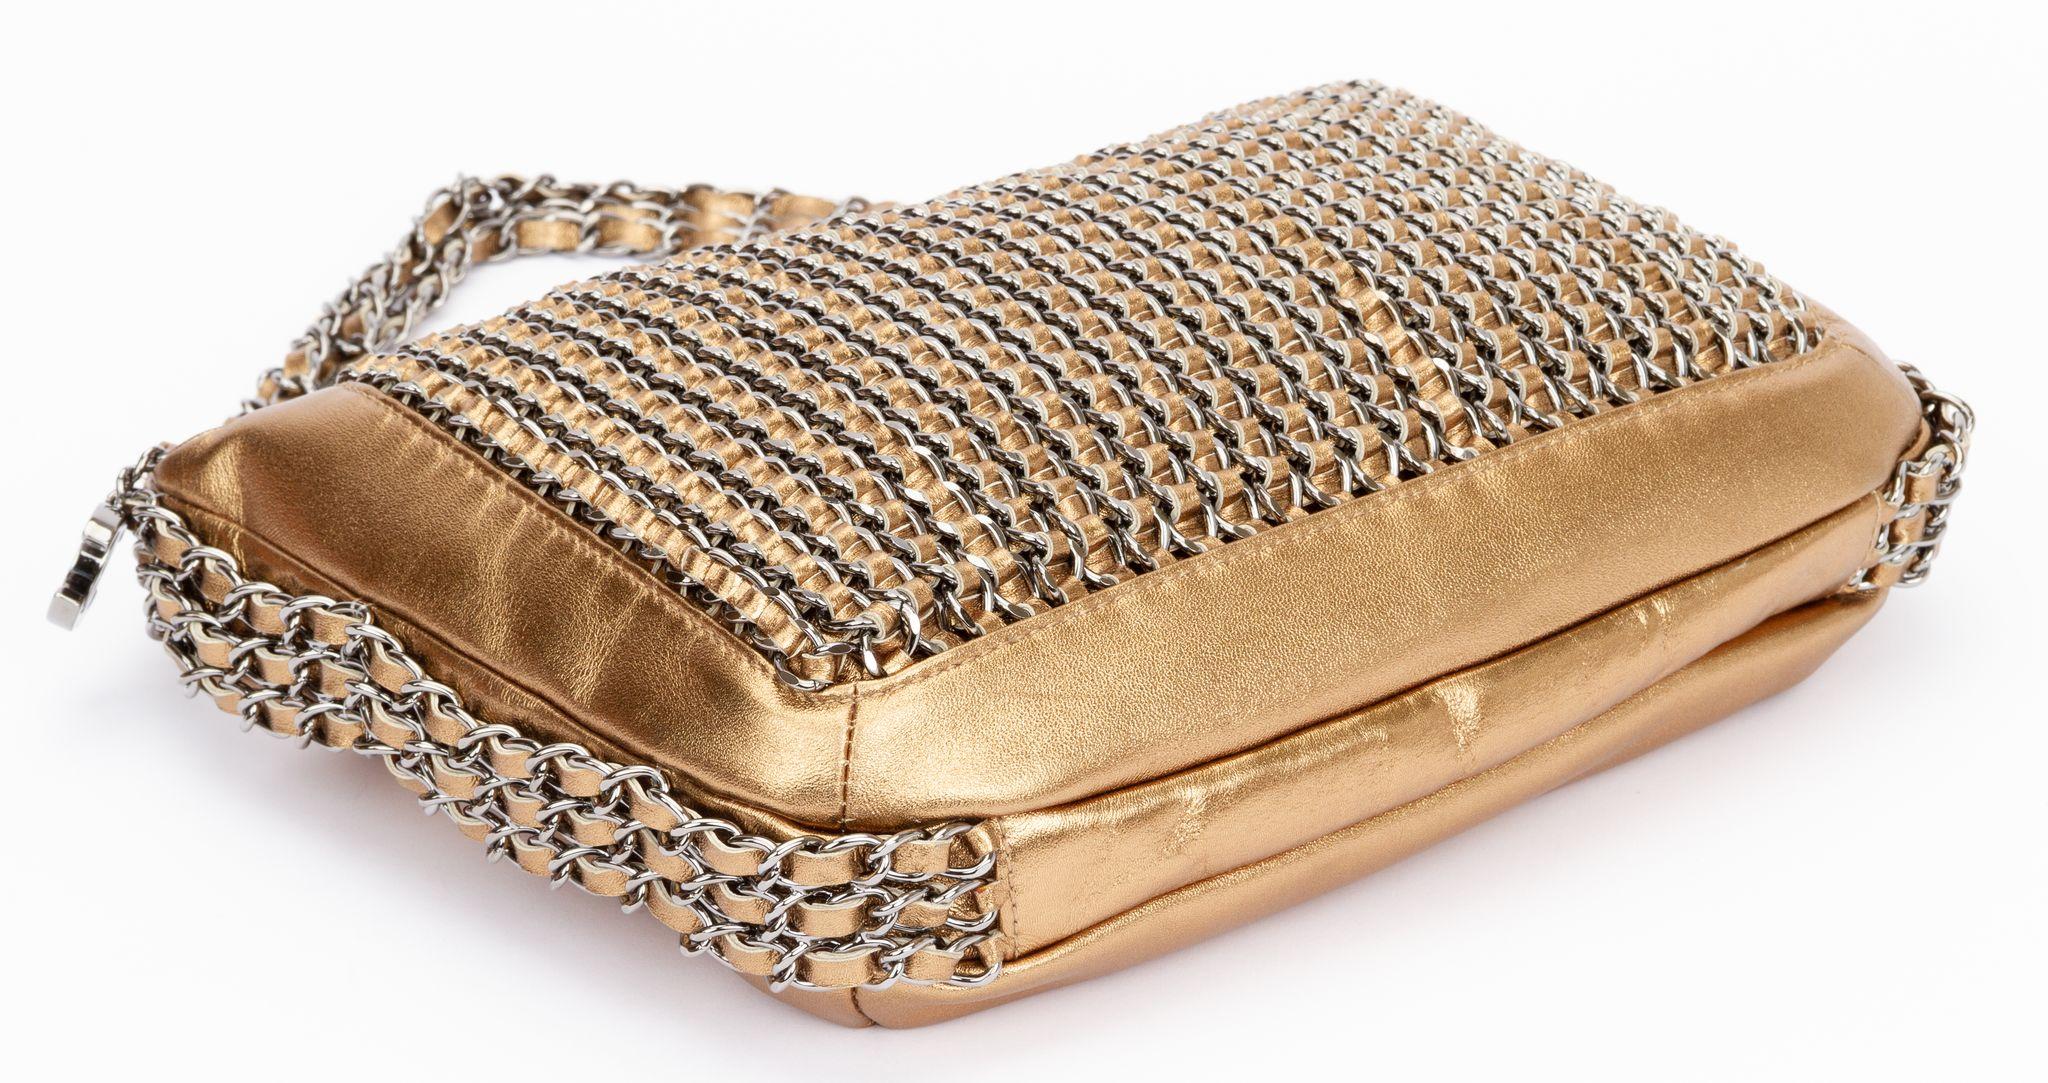 Chanel Multichian Gold Shoulder Bag In Excellent Condition For Sale In West Hollywood, CA